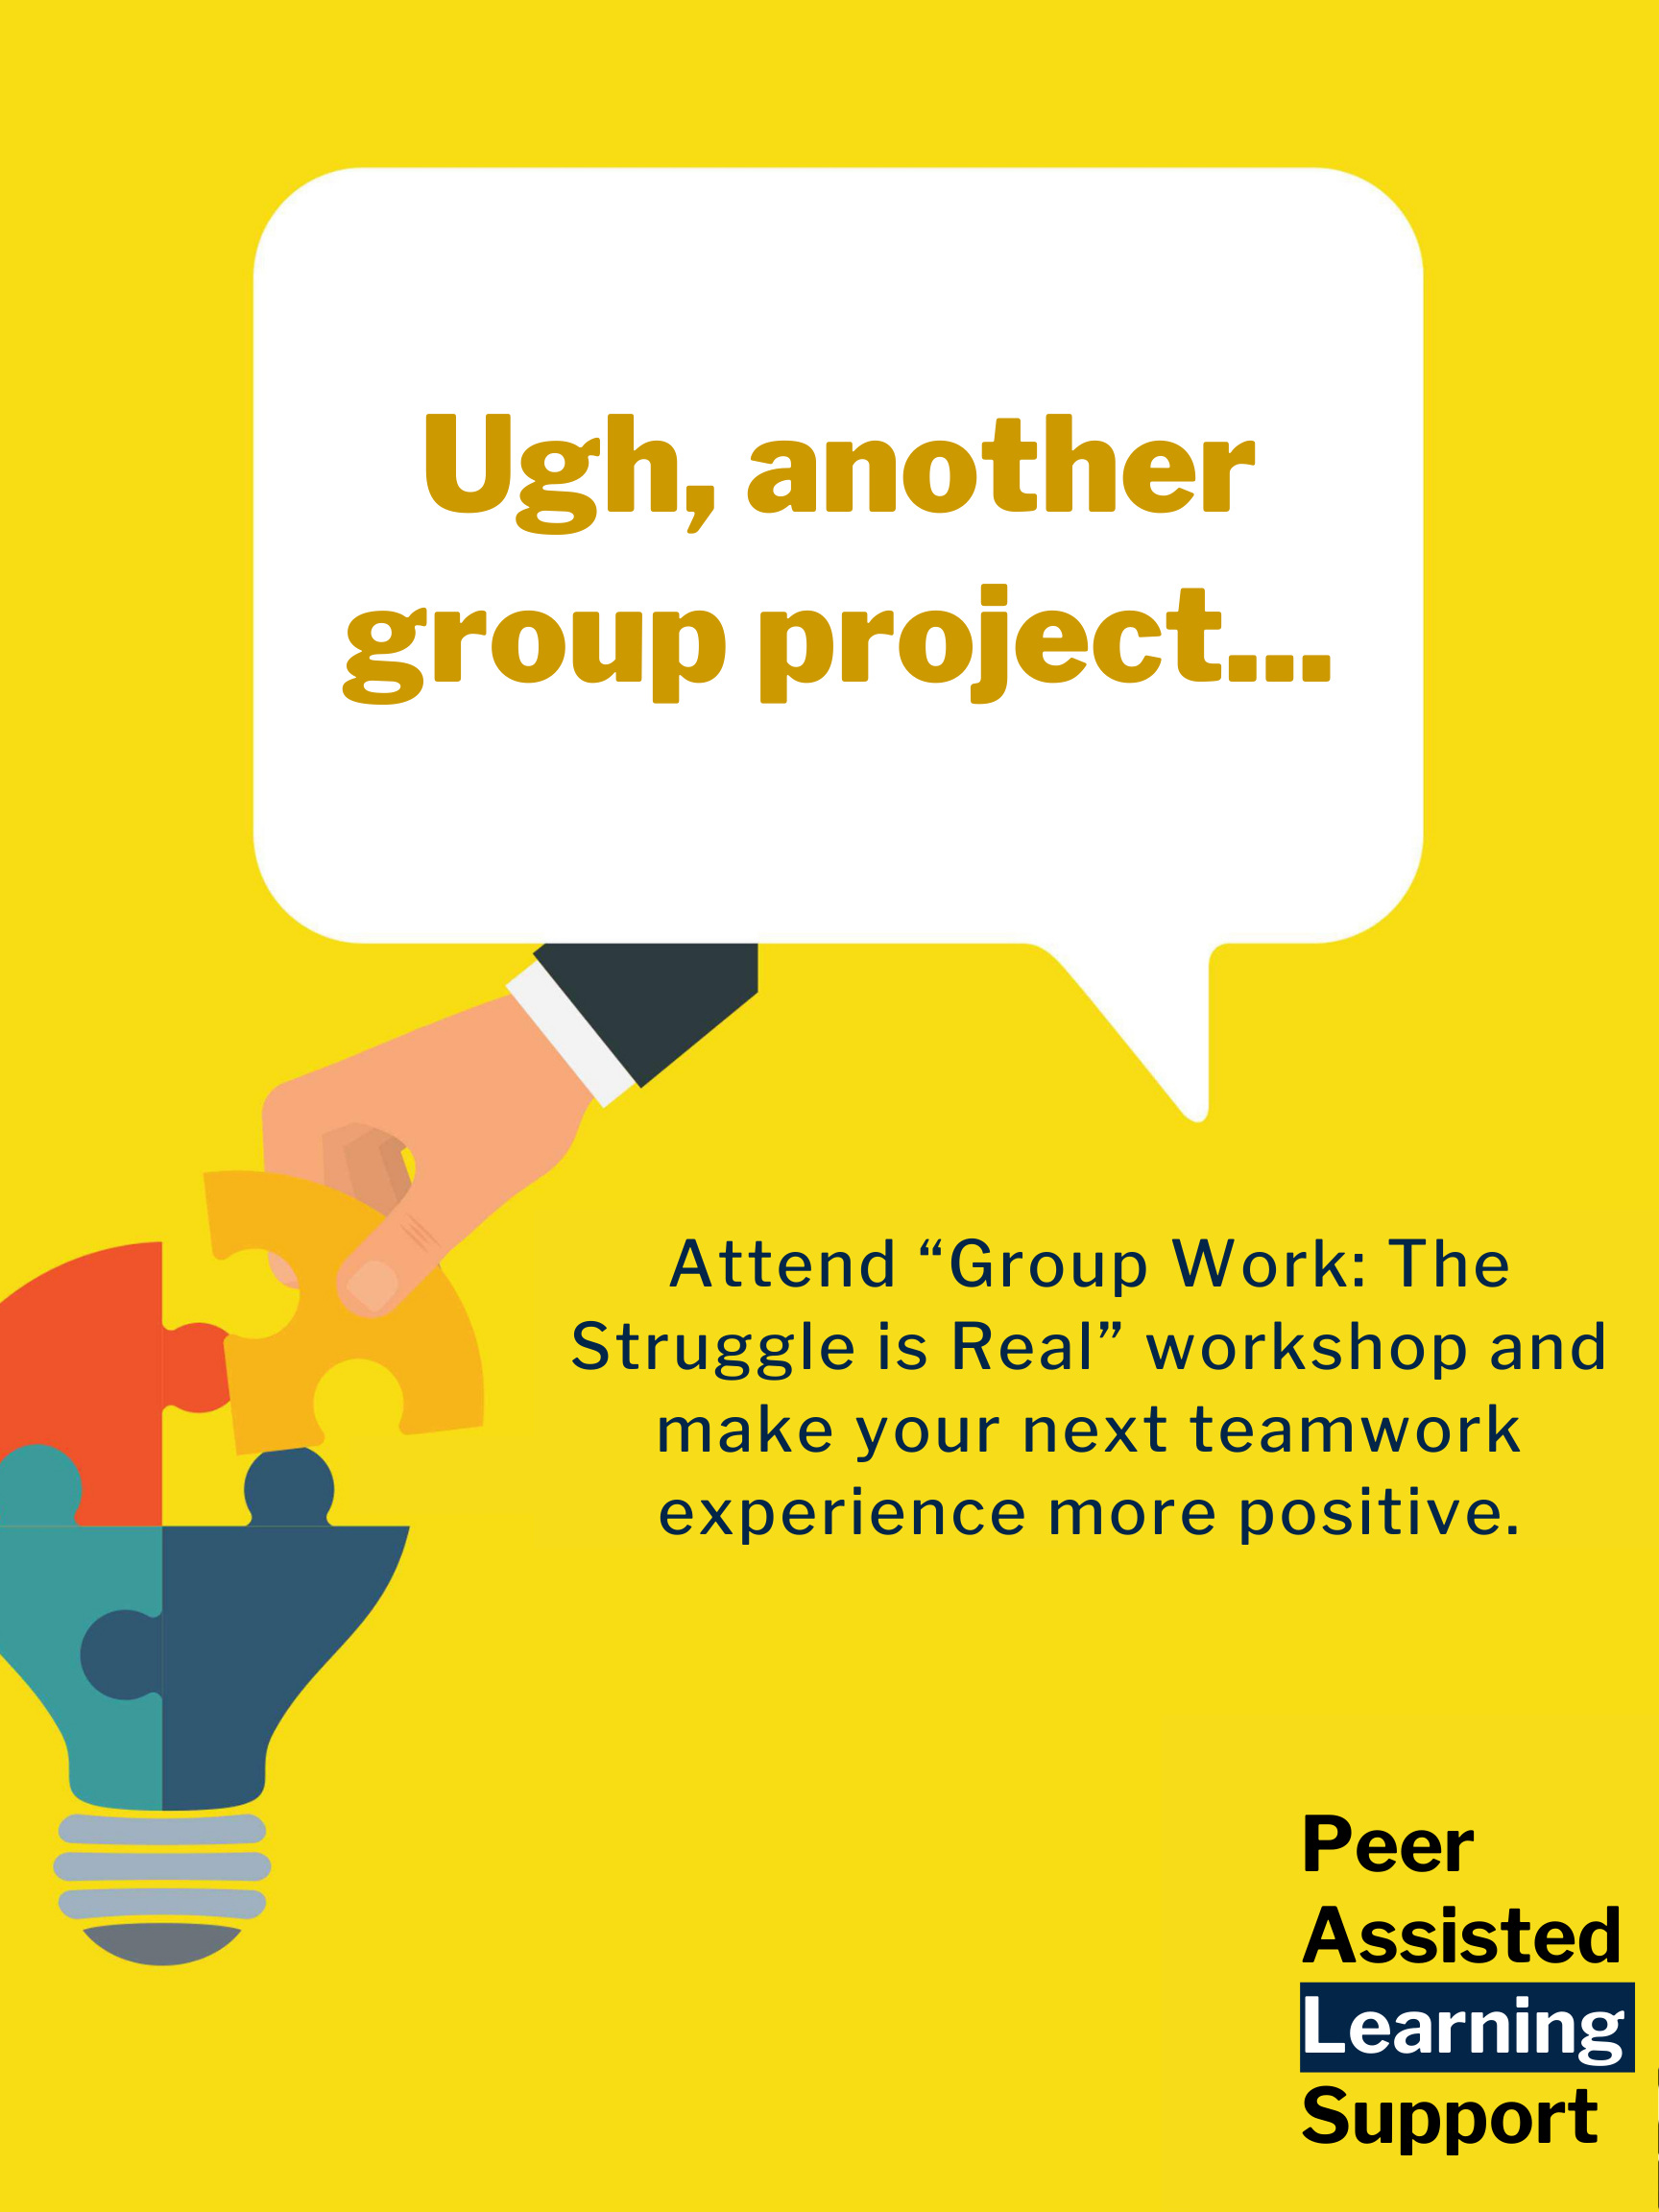 "Ugh, another group project" in a speech balloon